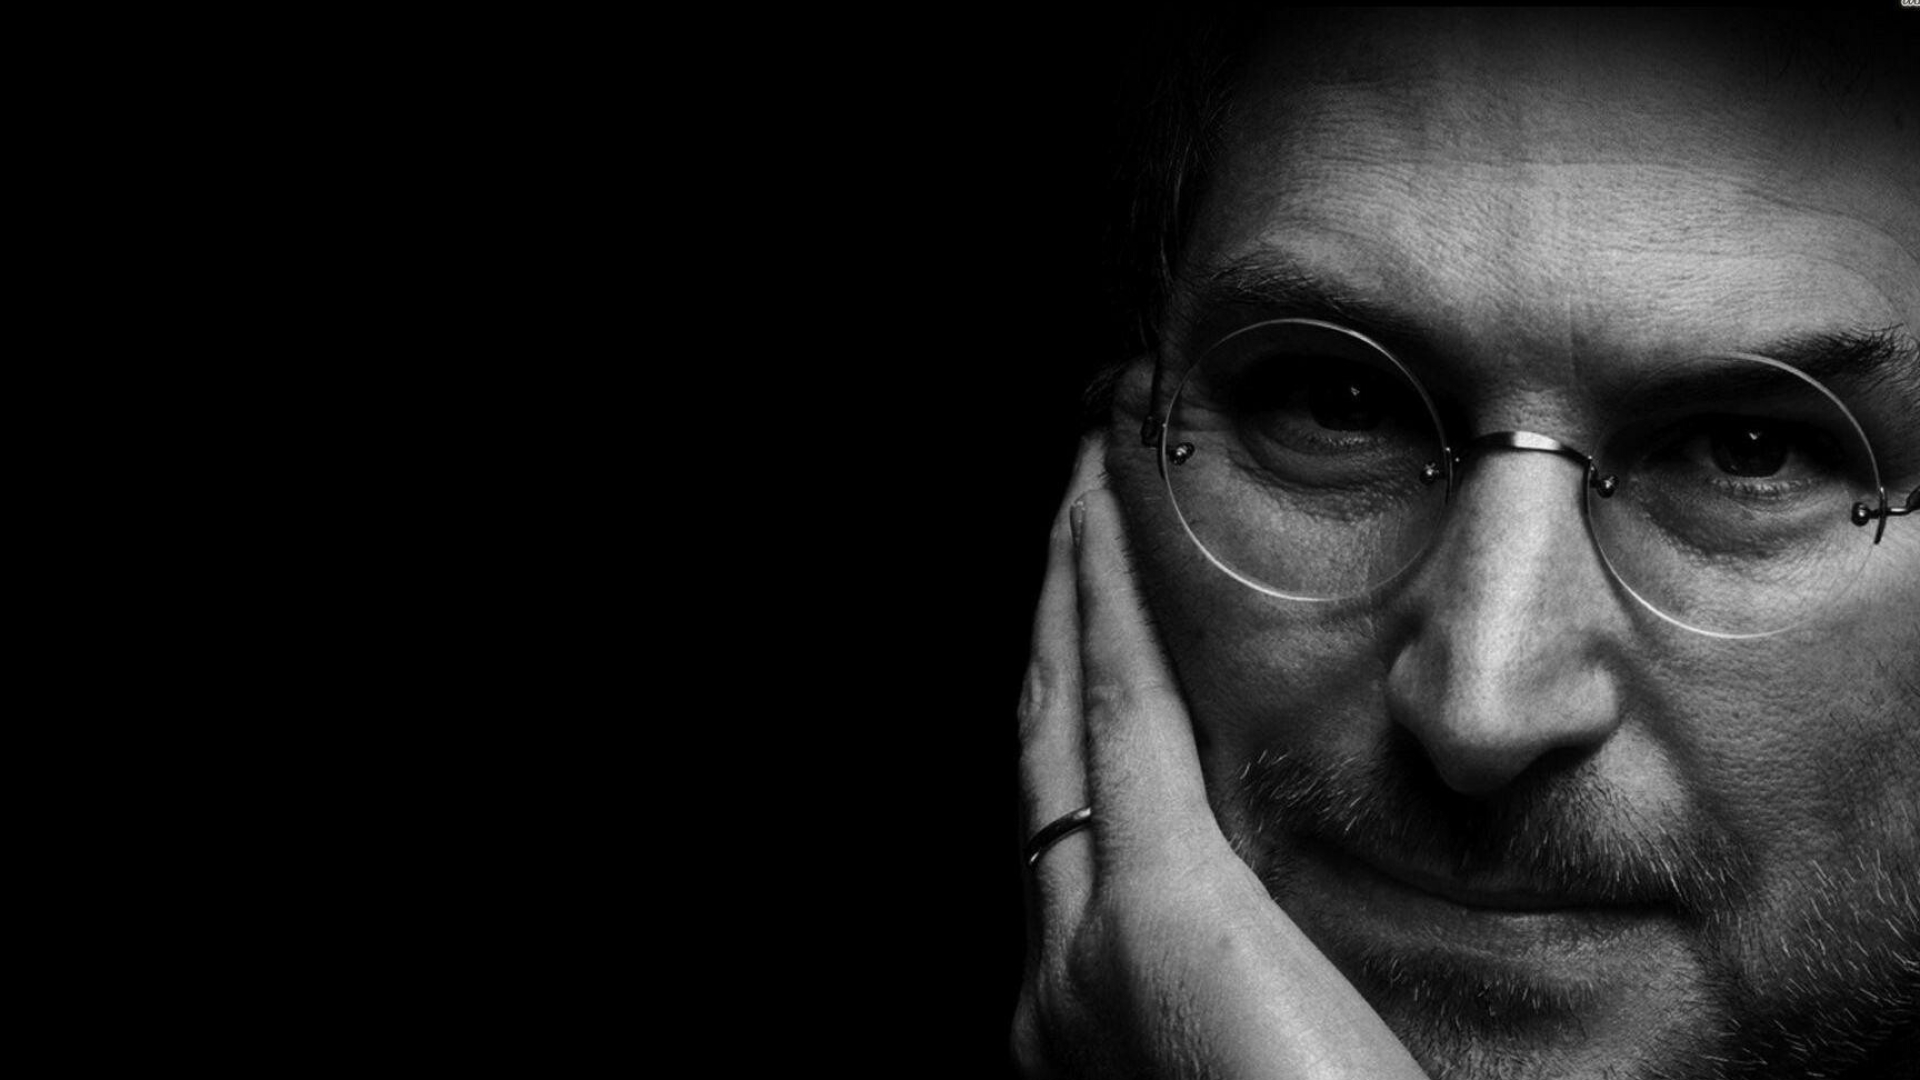 Steve Jobs: An American entrepreneur, Known for his brilliantly innovative mind, iPhone, iPad, Apple Watch, Mac. 1920x1080 Full HD Wallpaper.